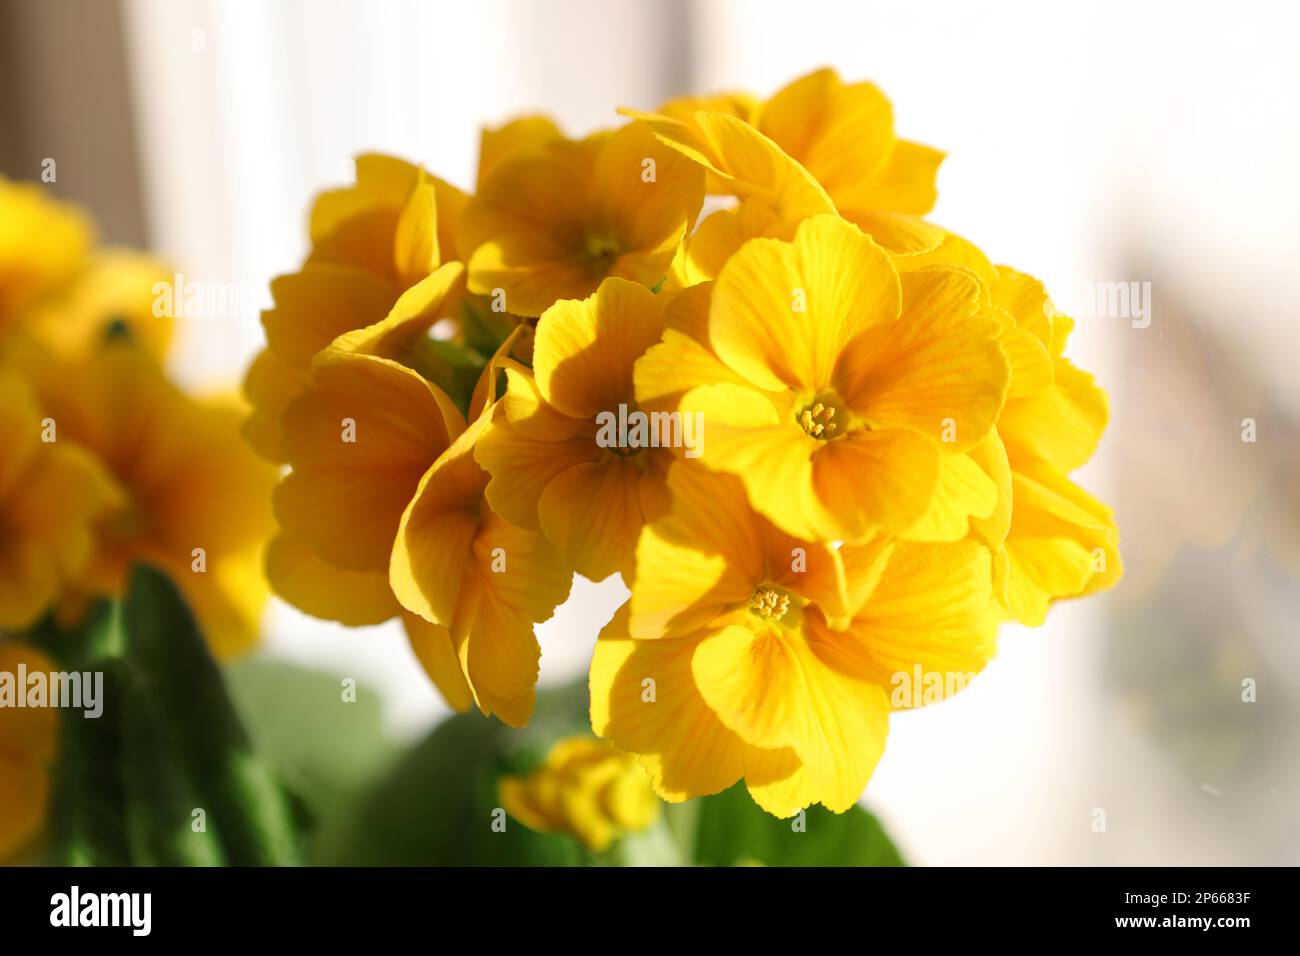 Primula elatior, golden yellow spring flowers bloom close-up. Flower head macro, spring potted plants. Primrose background. Stock Photo